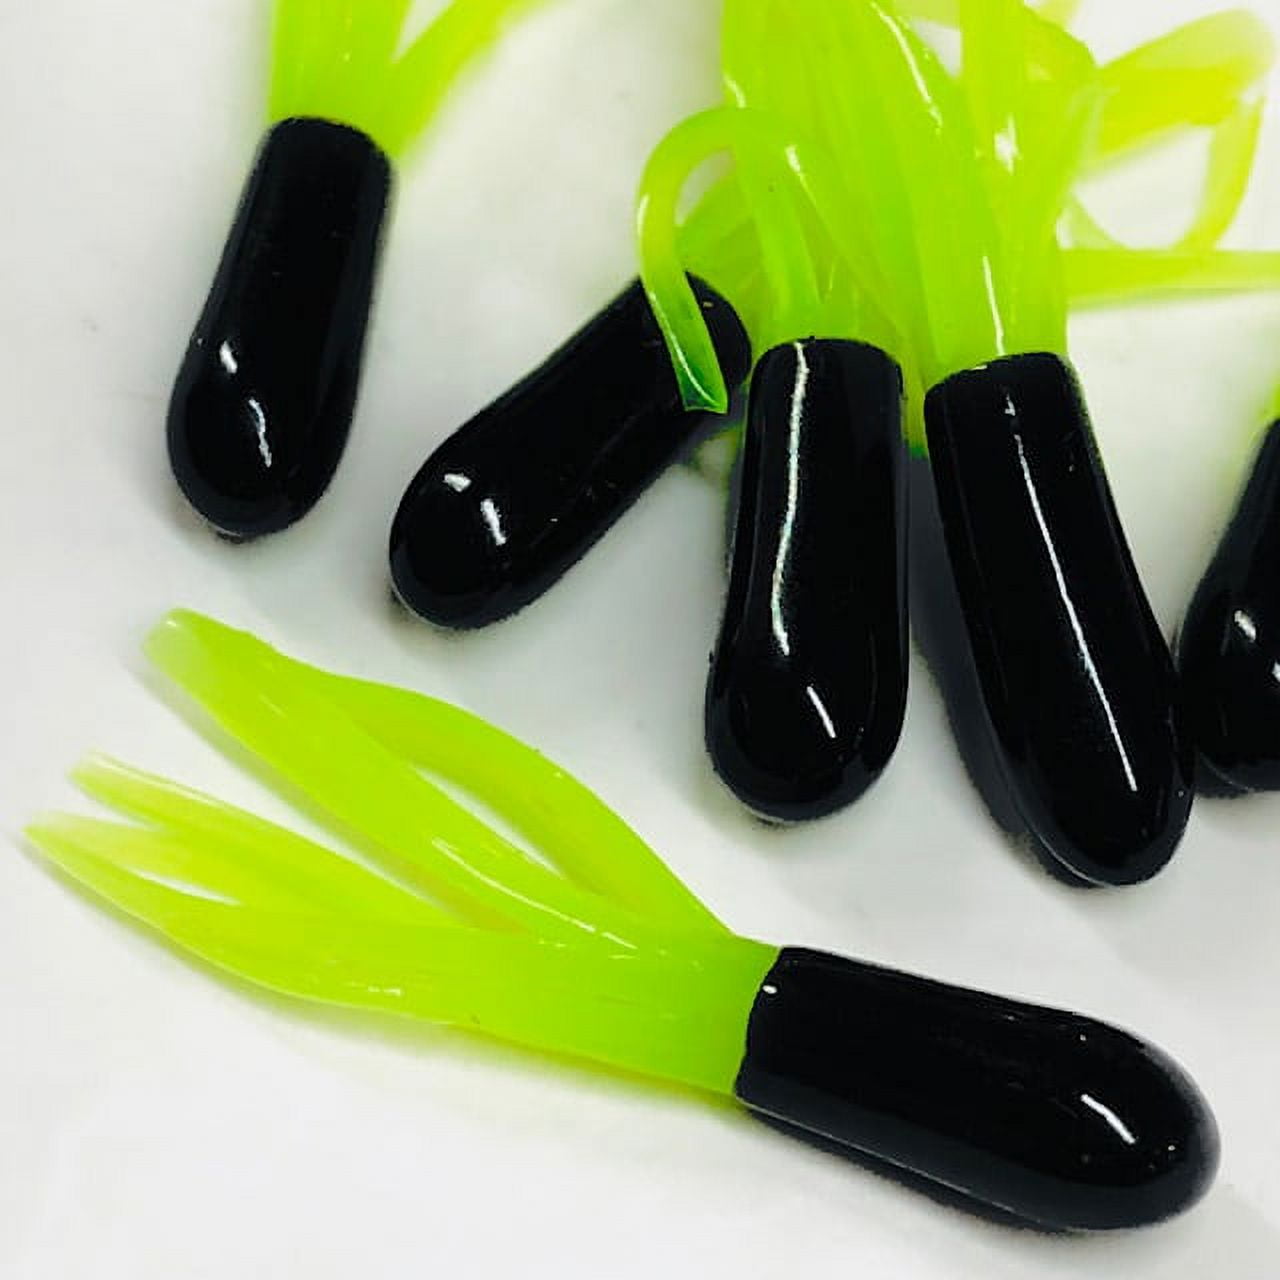 1.5 Original Crappie Tube Lures 50 Pack Black/Chartreuse